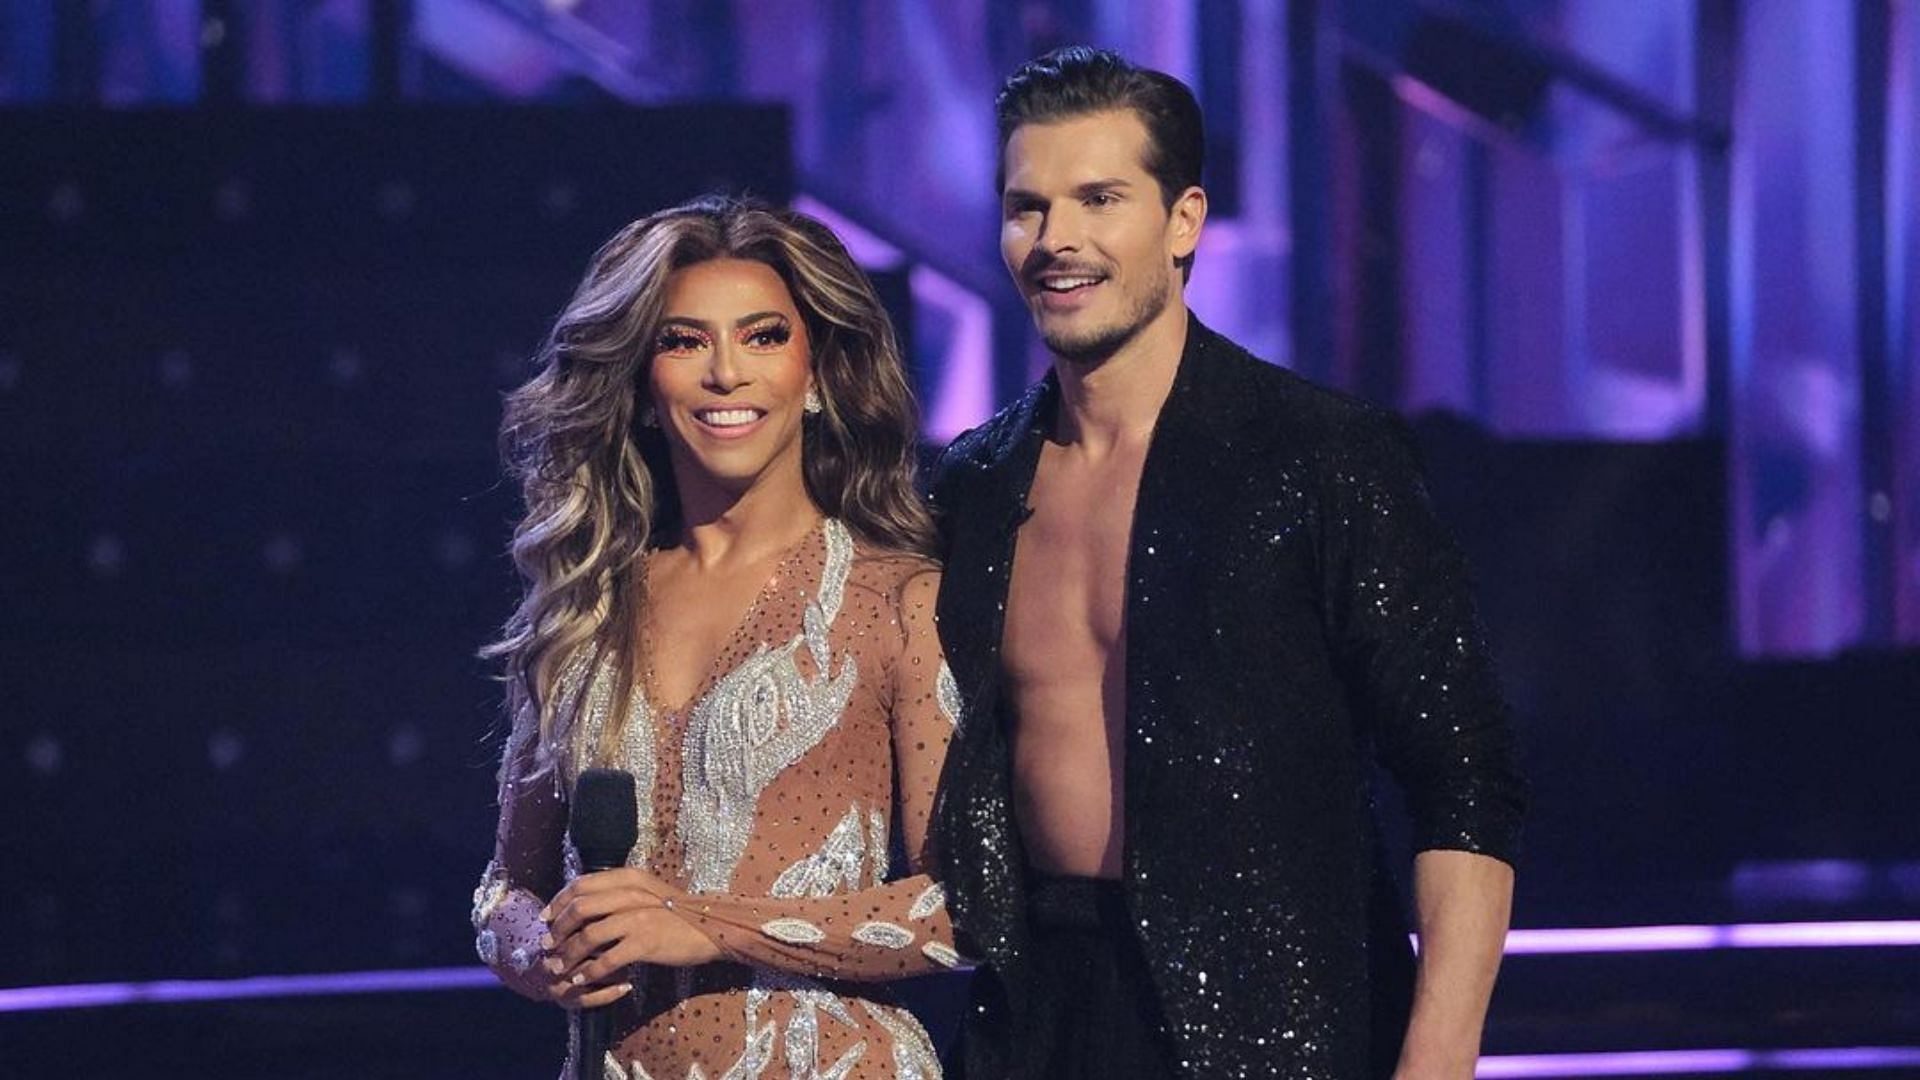 Shangela and Gleb put up an incredible performance on DWTS